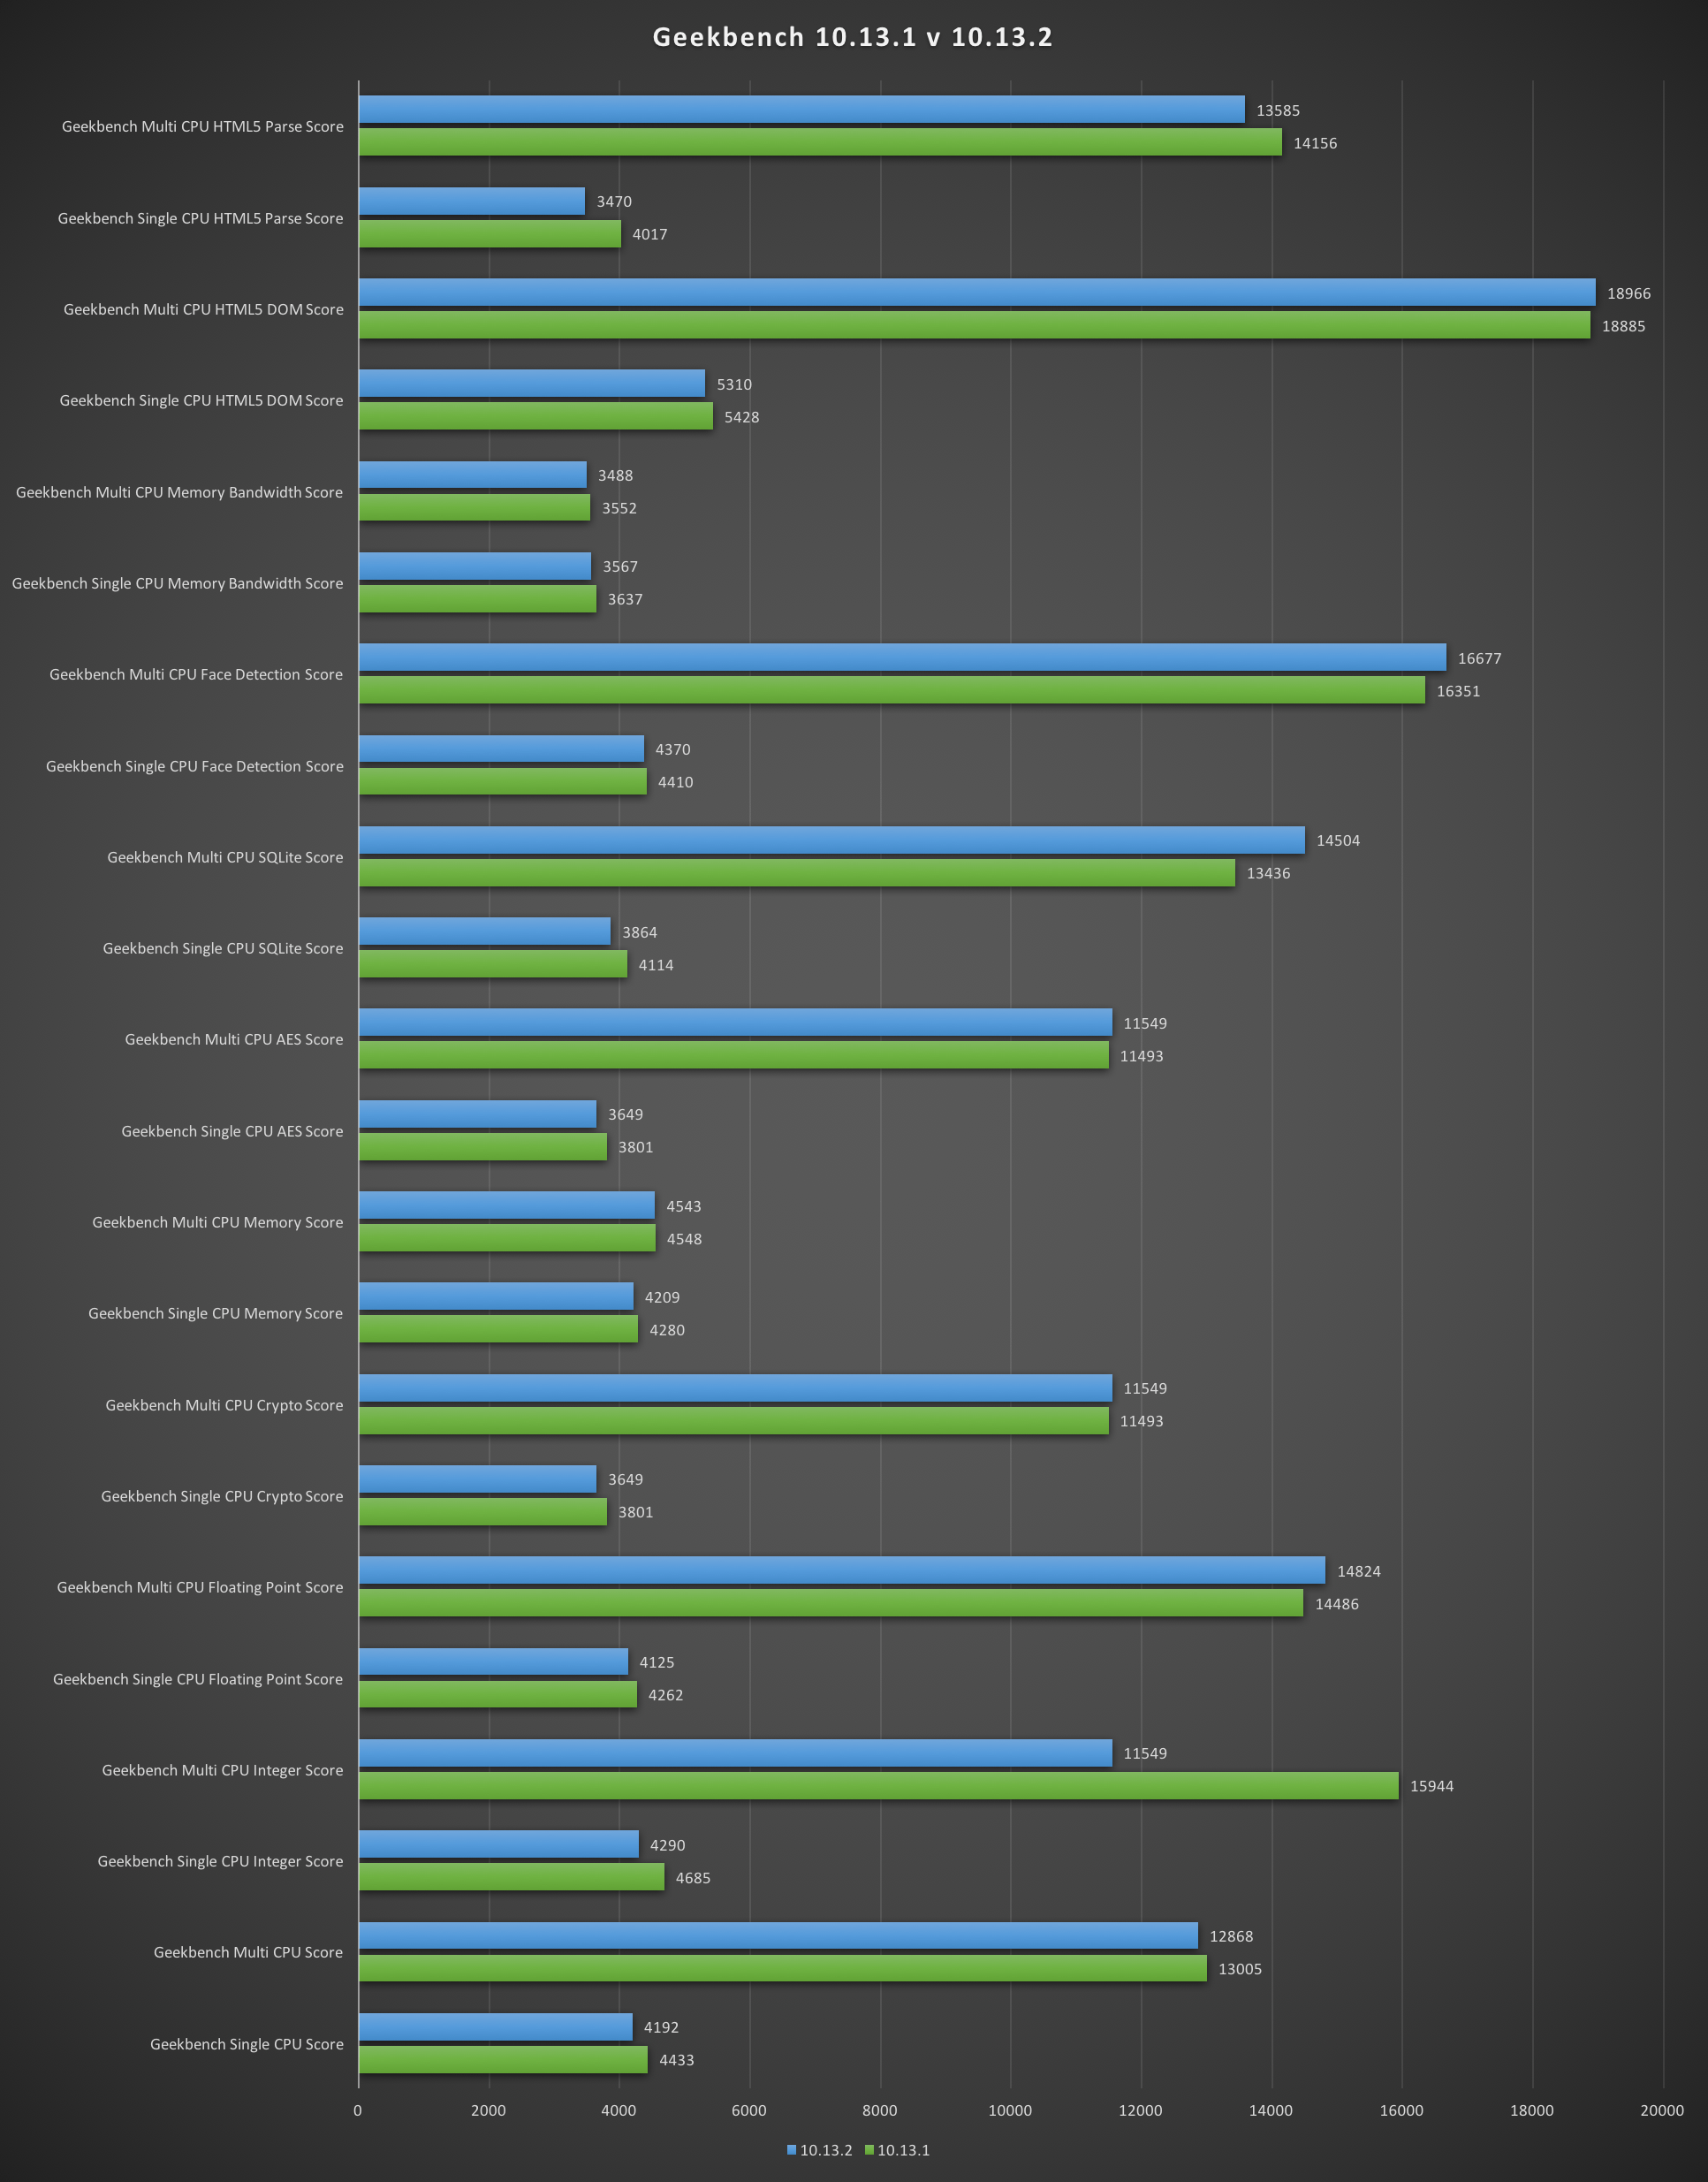 osx-speculative-015-geekbench-results-detailed